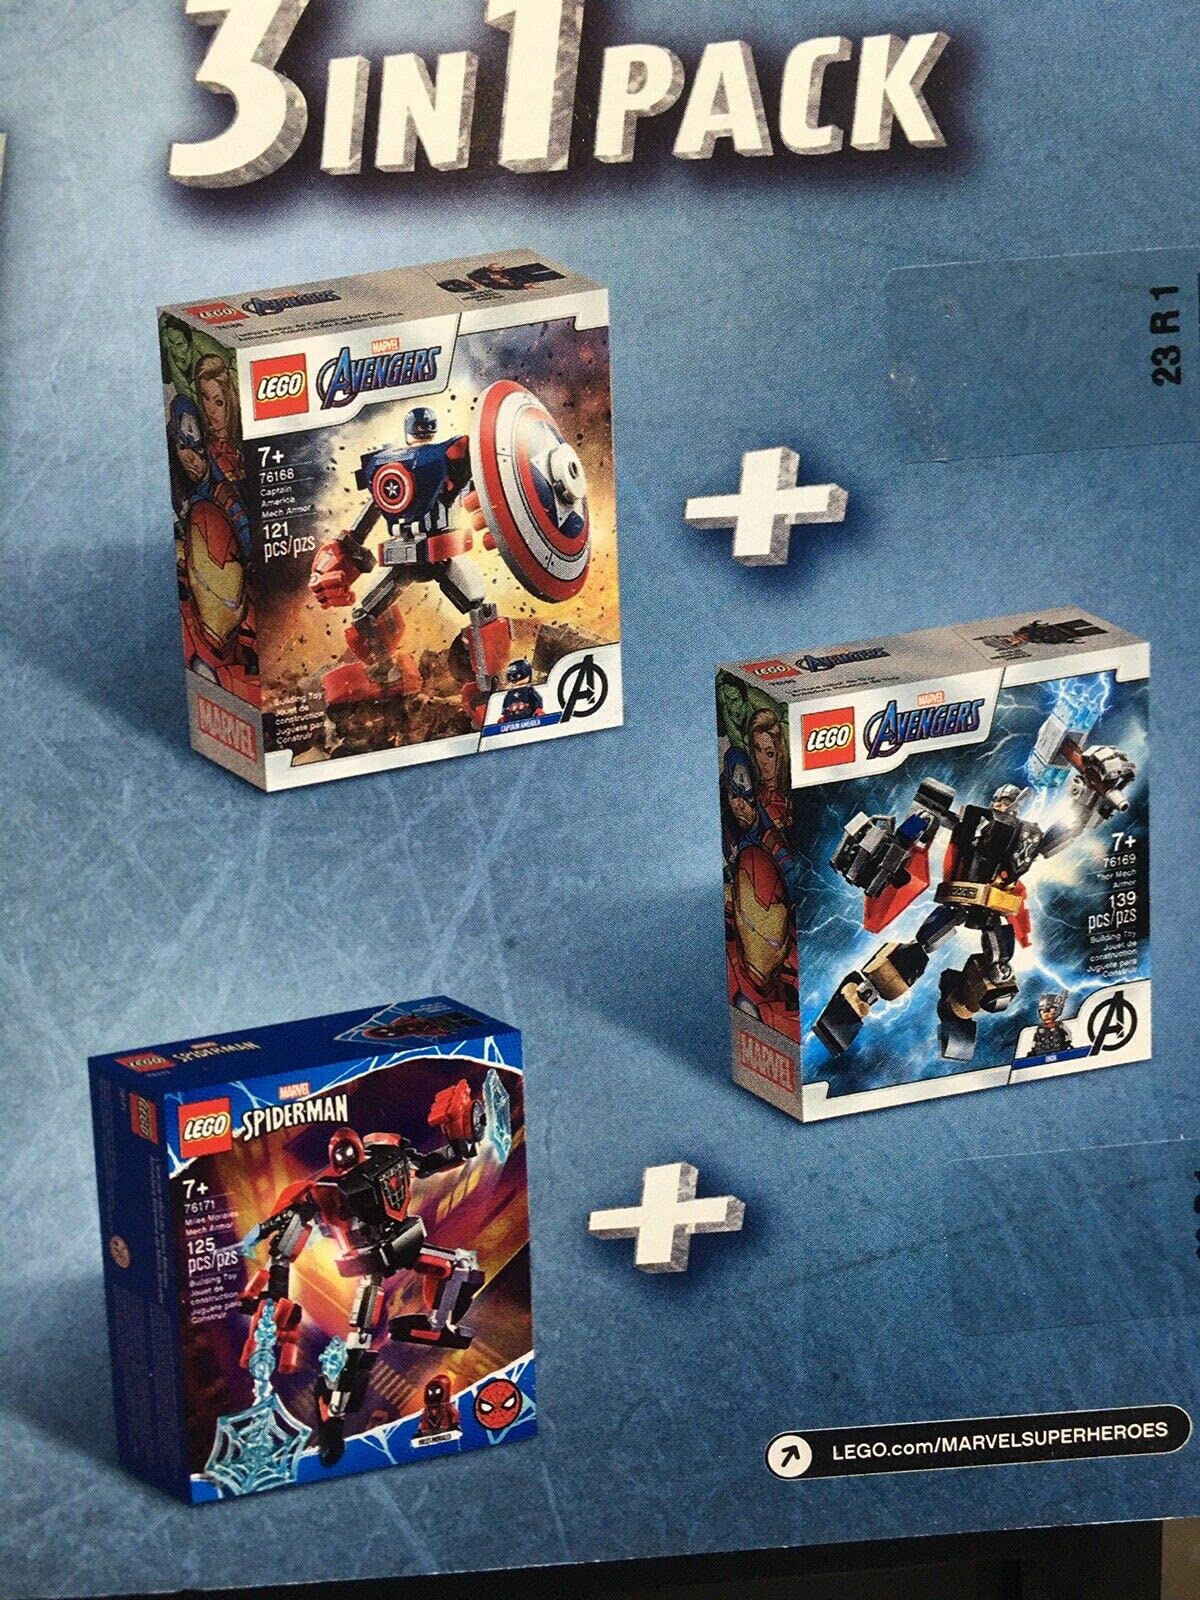 Lego Super Heroes Marvel Tri-Pack Included: Marvel Avengers Classic Thor, Captain America, & Spider-Man Miles Morales 385 Total Pieces